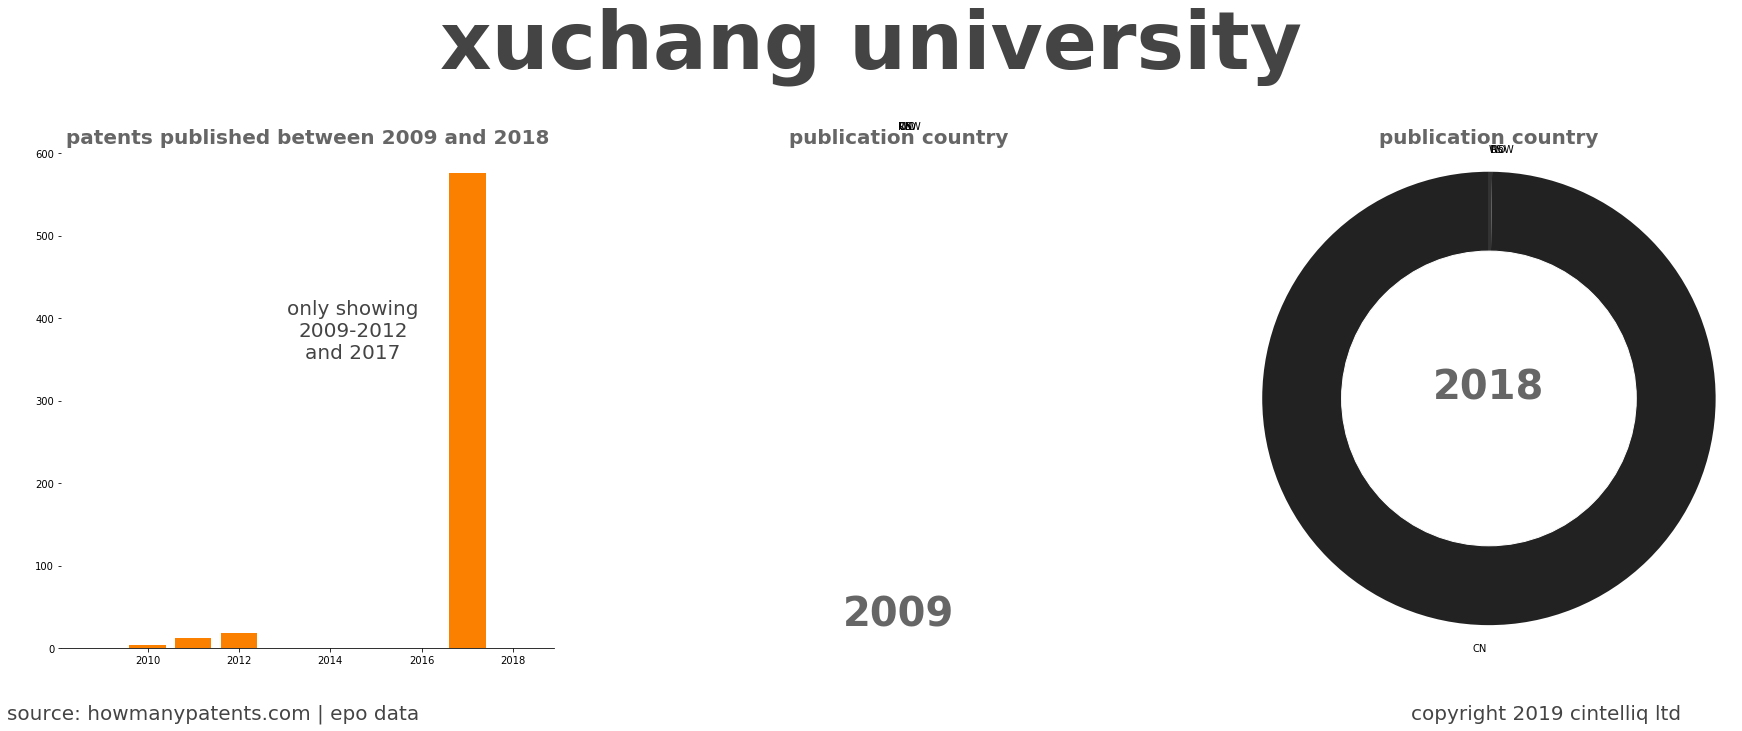 summary of patents for Xuchang University